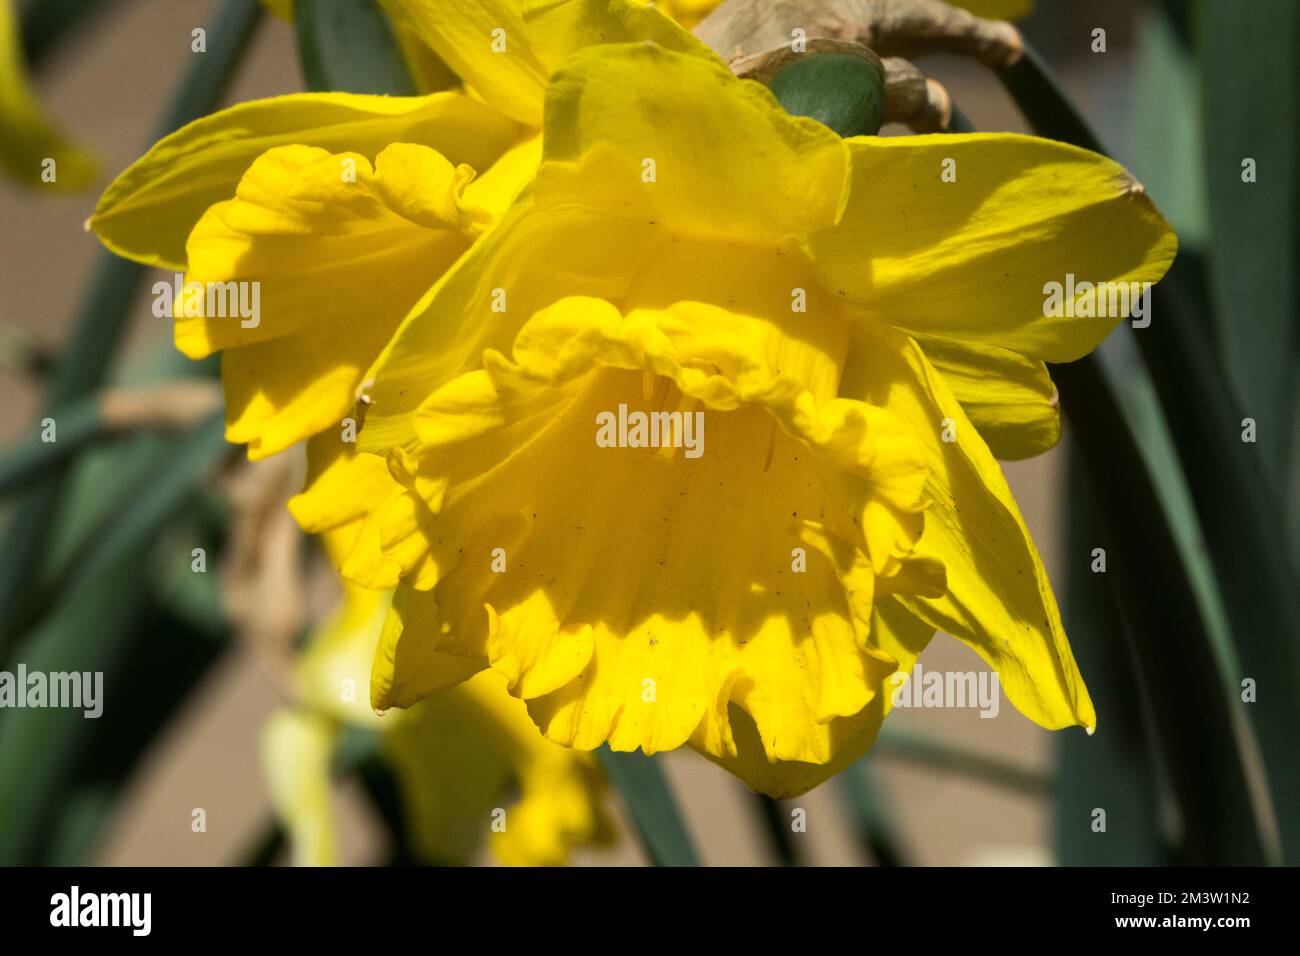 Trumpet Daffodil, Narcissus, Yellow, Flower, Daffodil, Bloom, Variety, Yellow daffodil, Cultivar, Spring Narcissus 'Arkle' Stock Photo